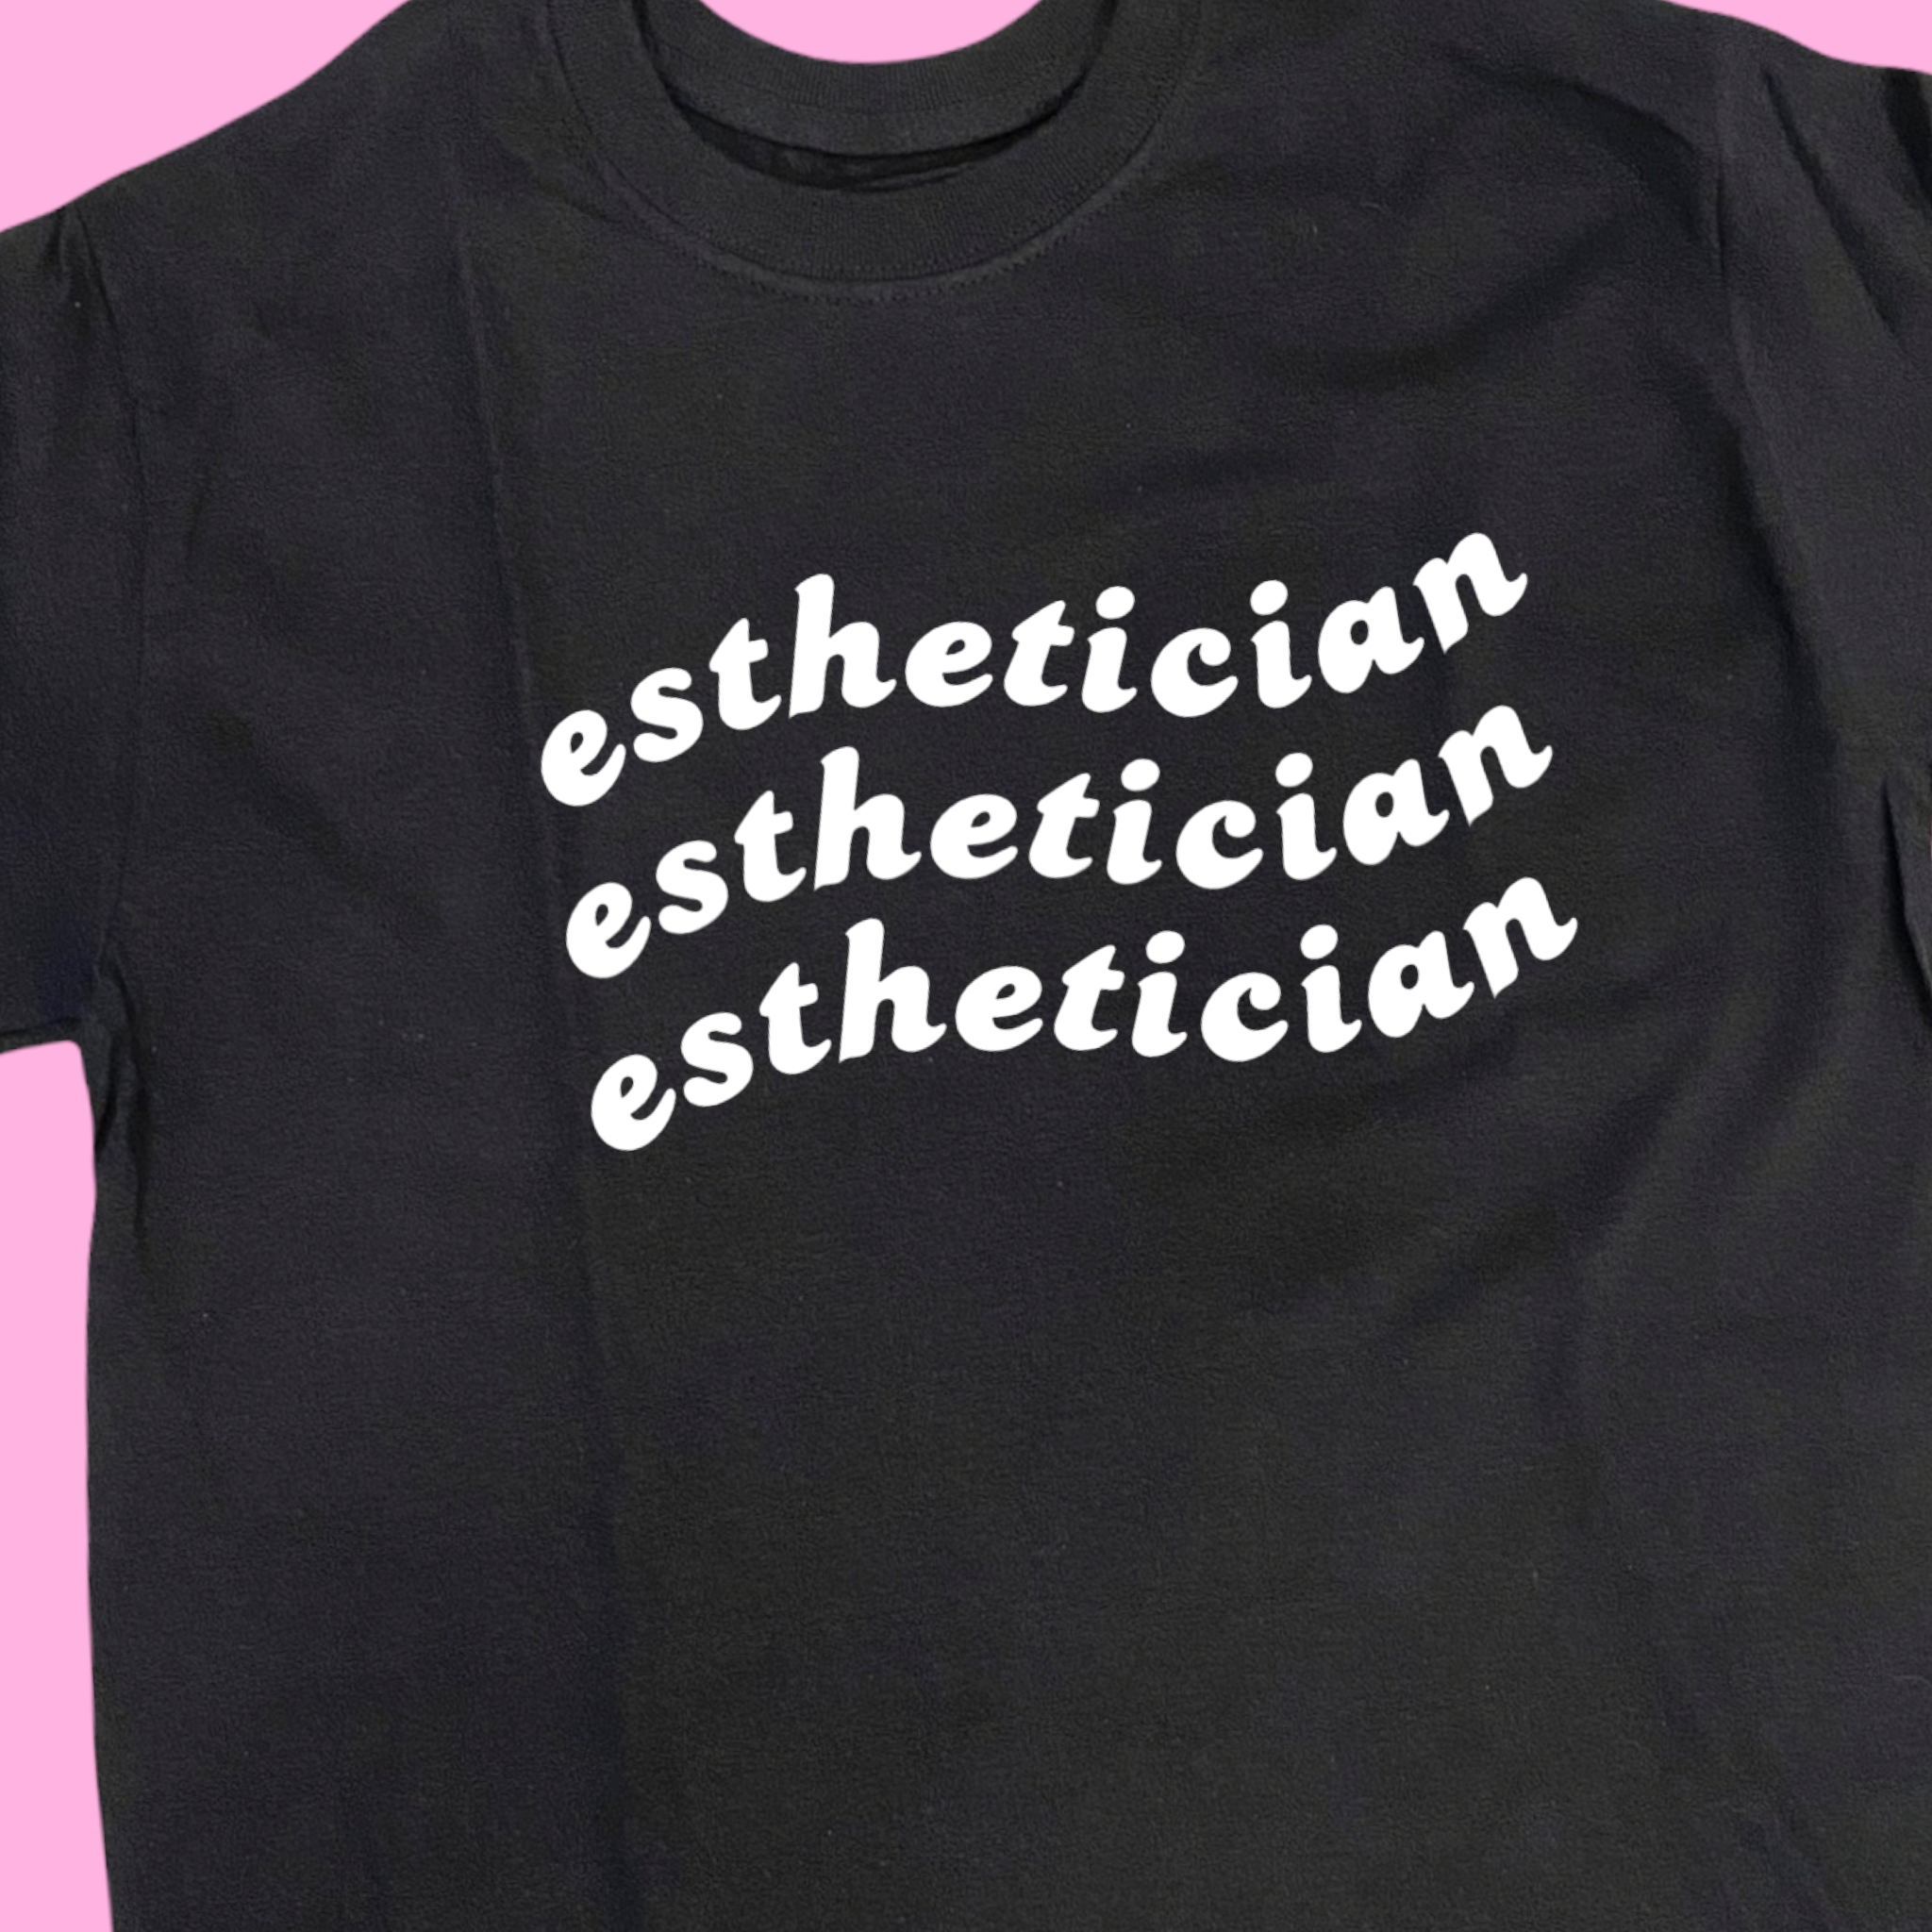 T-SHIRT - ESTHETICIAN ( relaxed fit )